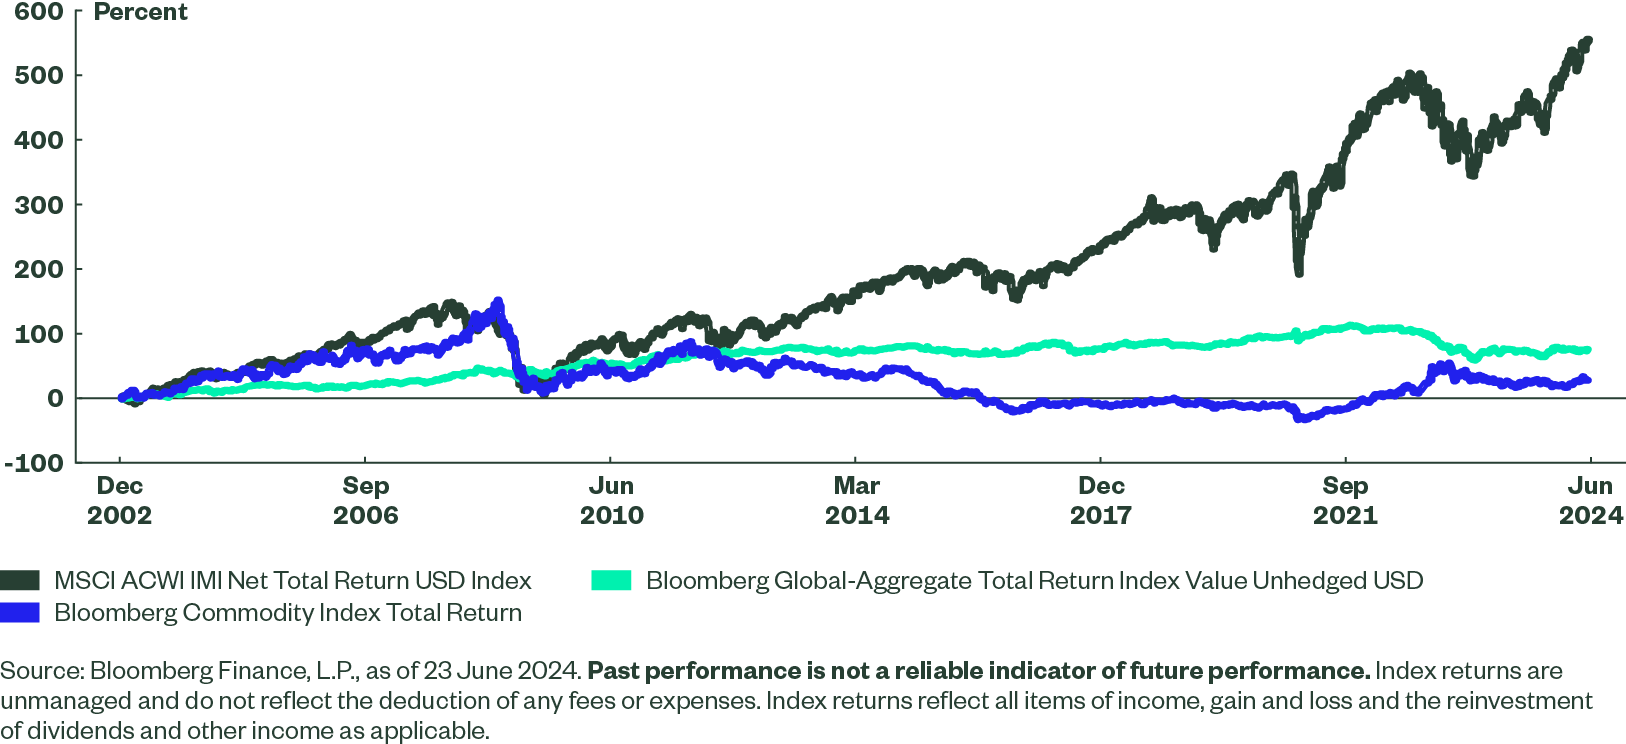 Figure 1 shows performance over the last 20+ years for global equities, bonds, and commodities, showing a large divergence in performance as global equities have increased significantly.